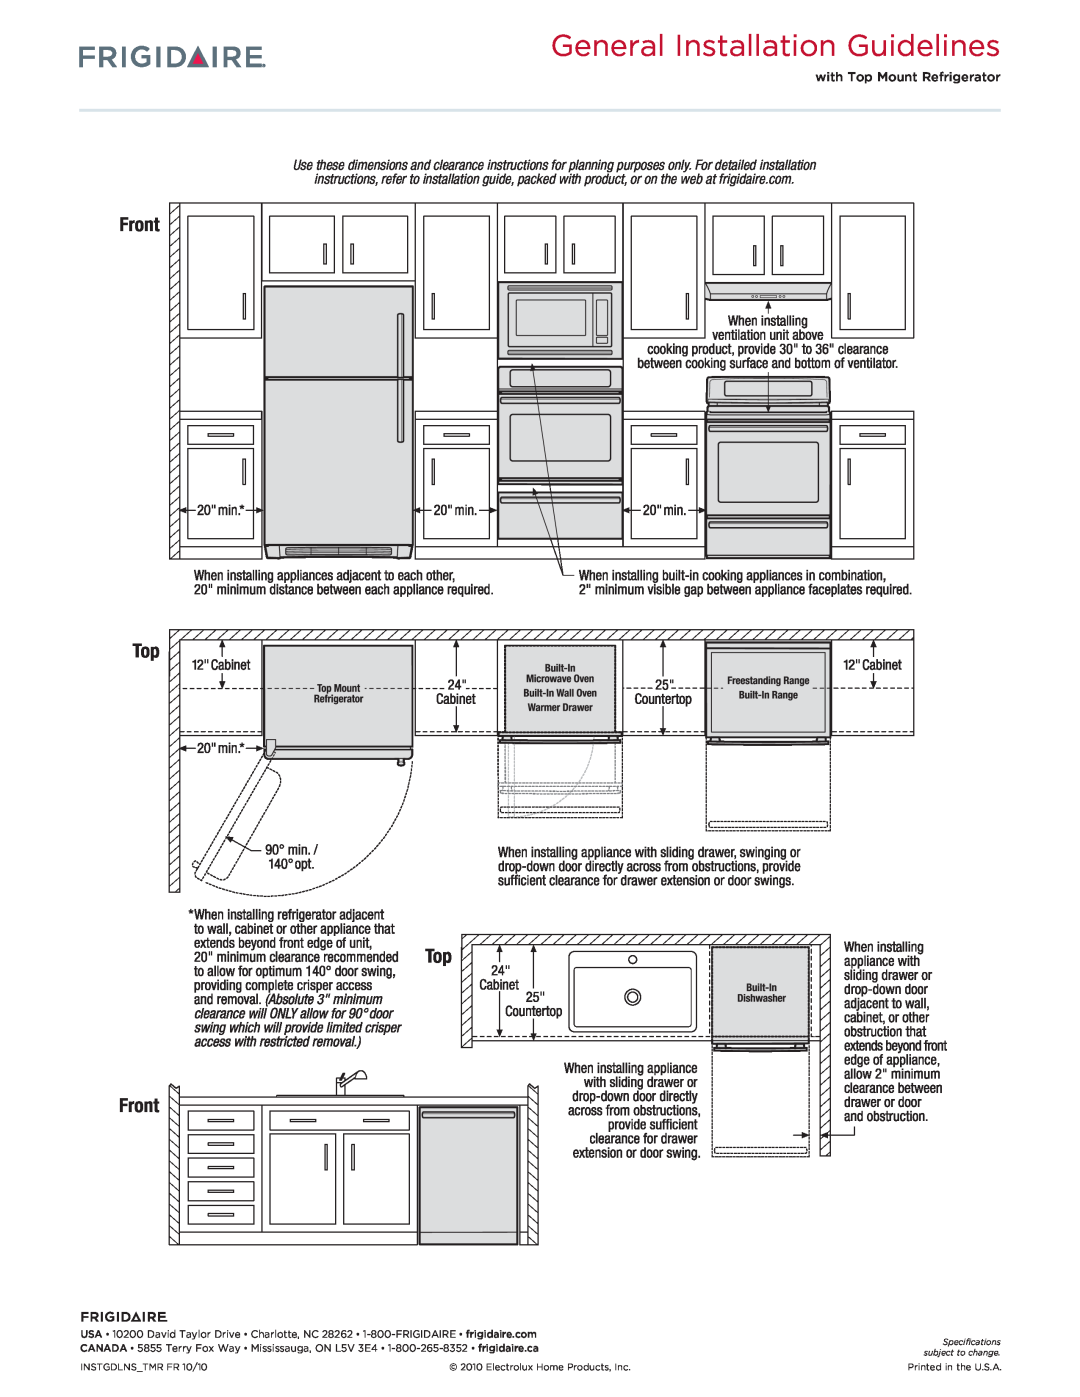 Frigidaire FGGF3041K F General Installation Guidelines, Top Front, with Top Mount Refrigerator, INSTGDLNS TMR FR 10/10 